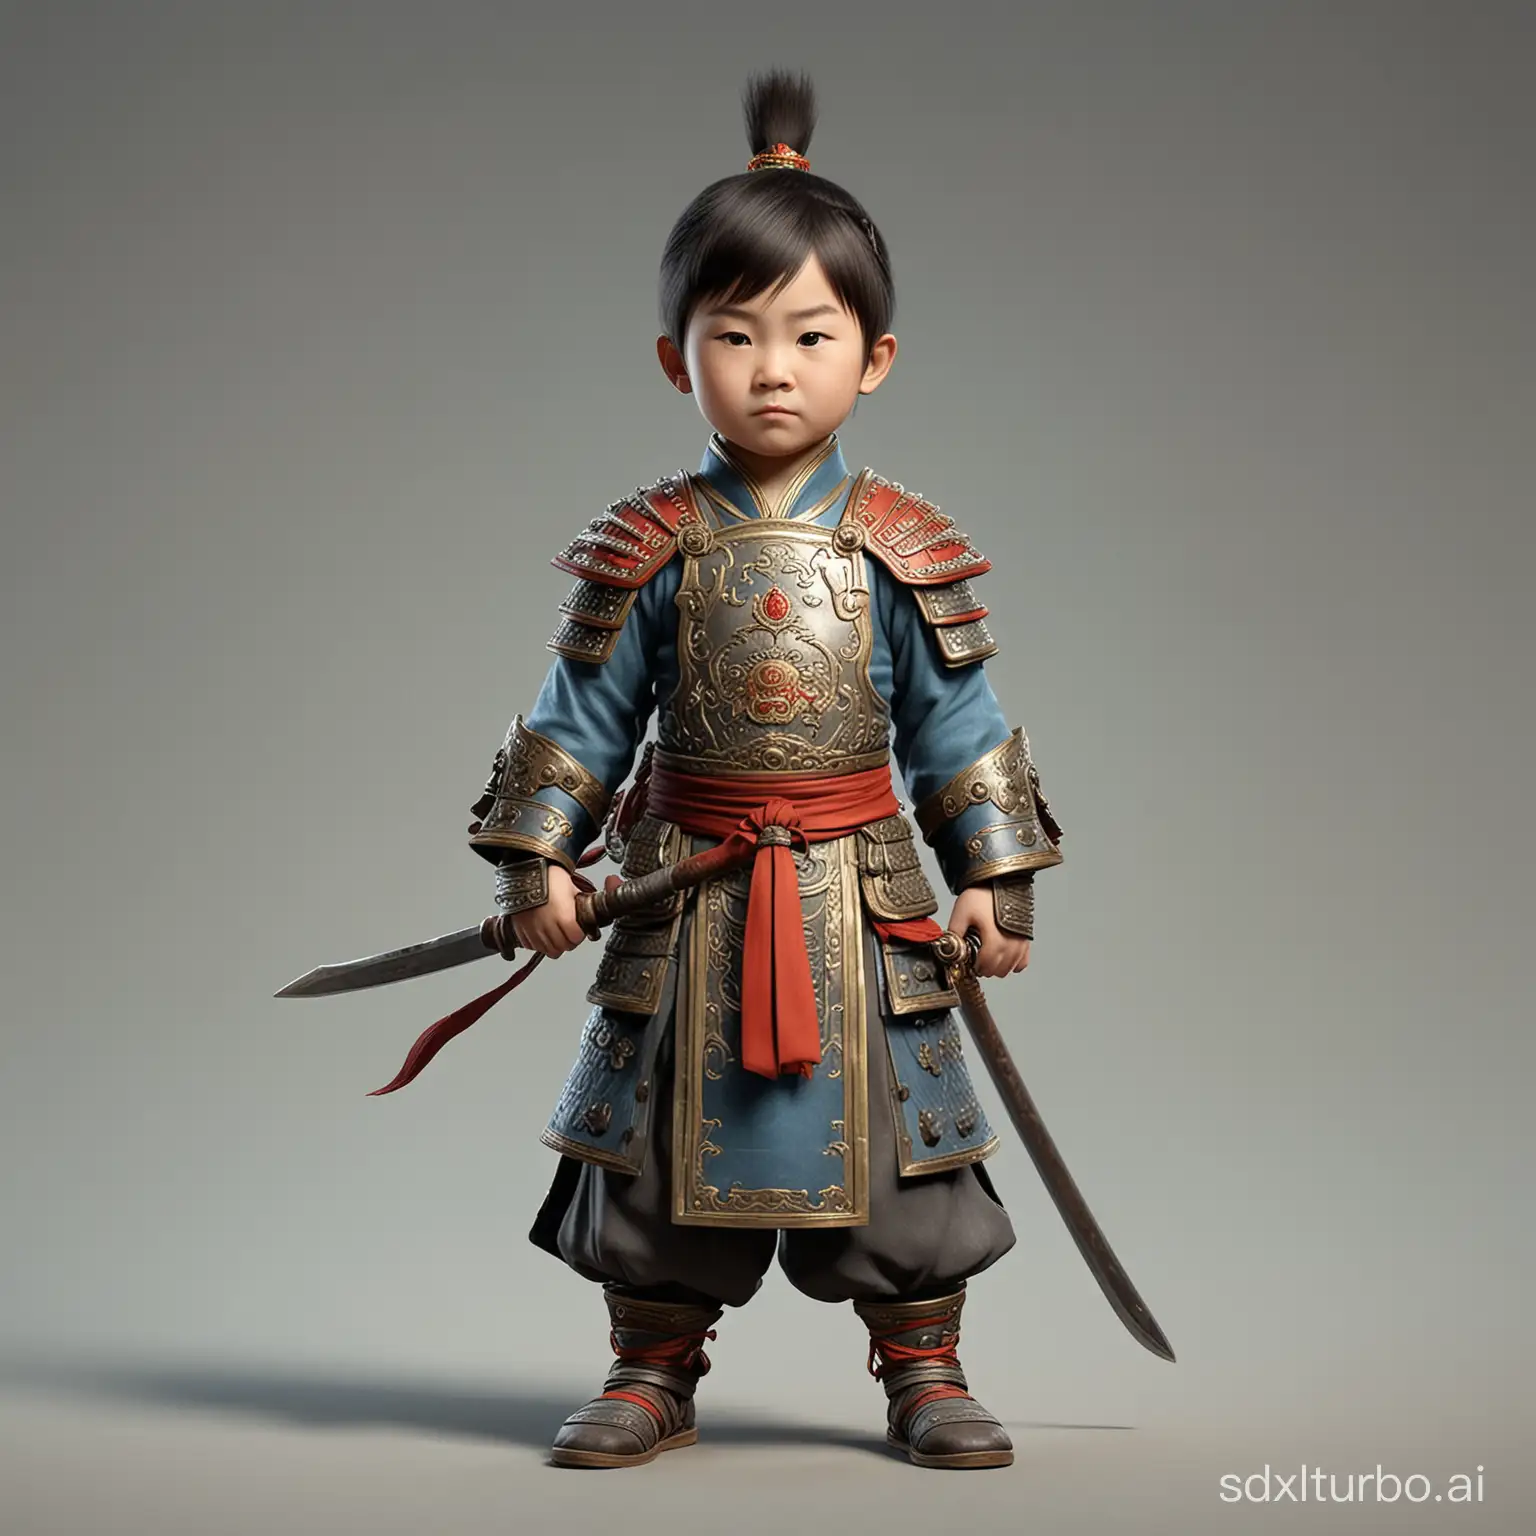 Young-Chinese-Warrior-Boy-Stands-Tall-in-Video-Game-Character-Pose